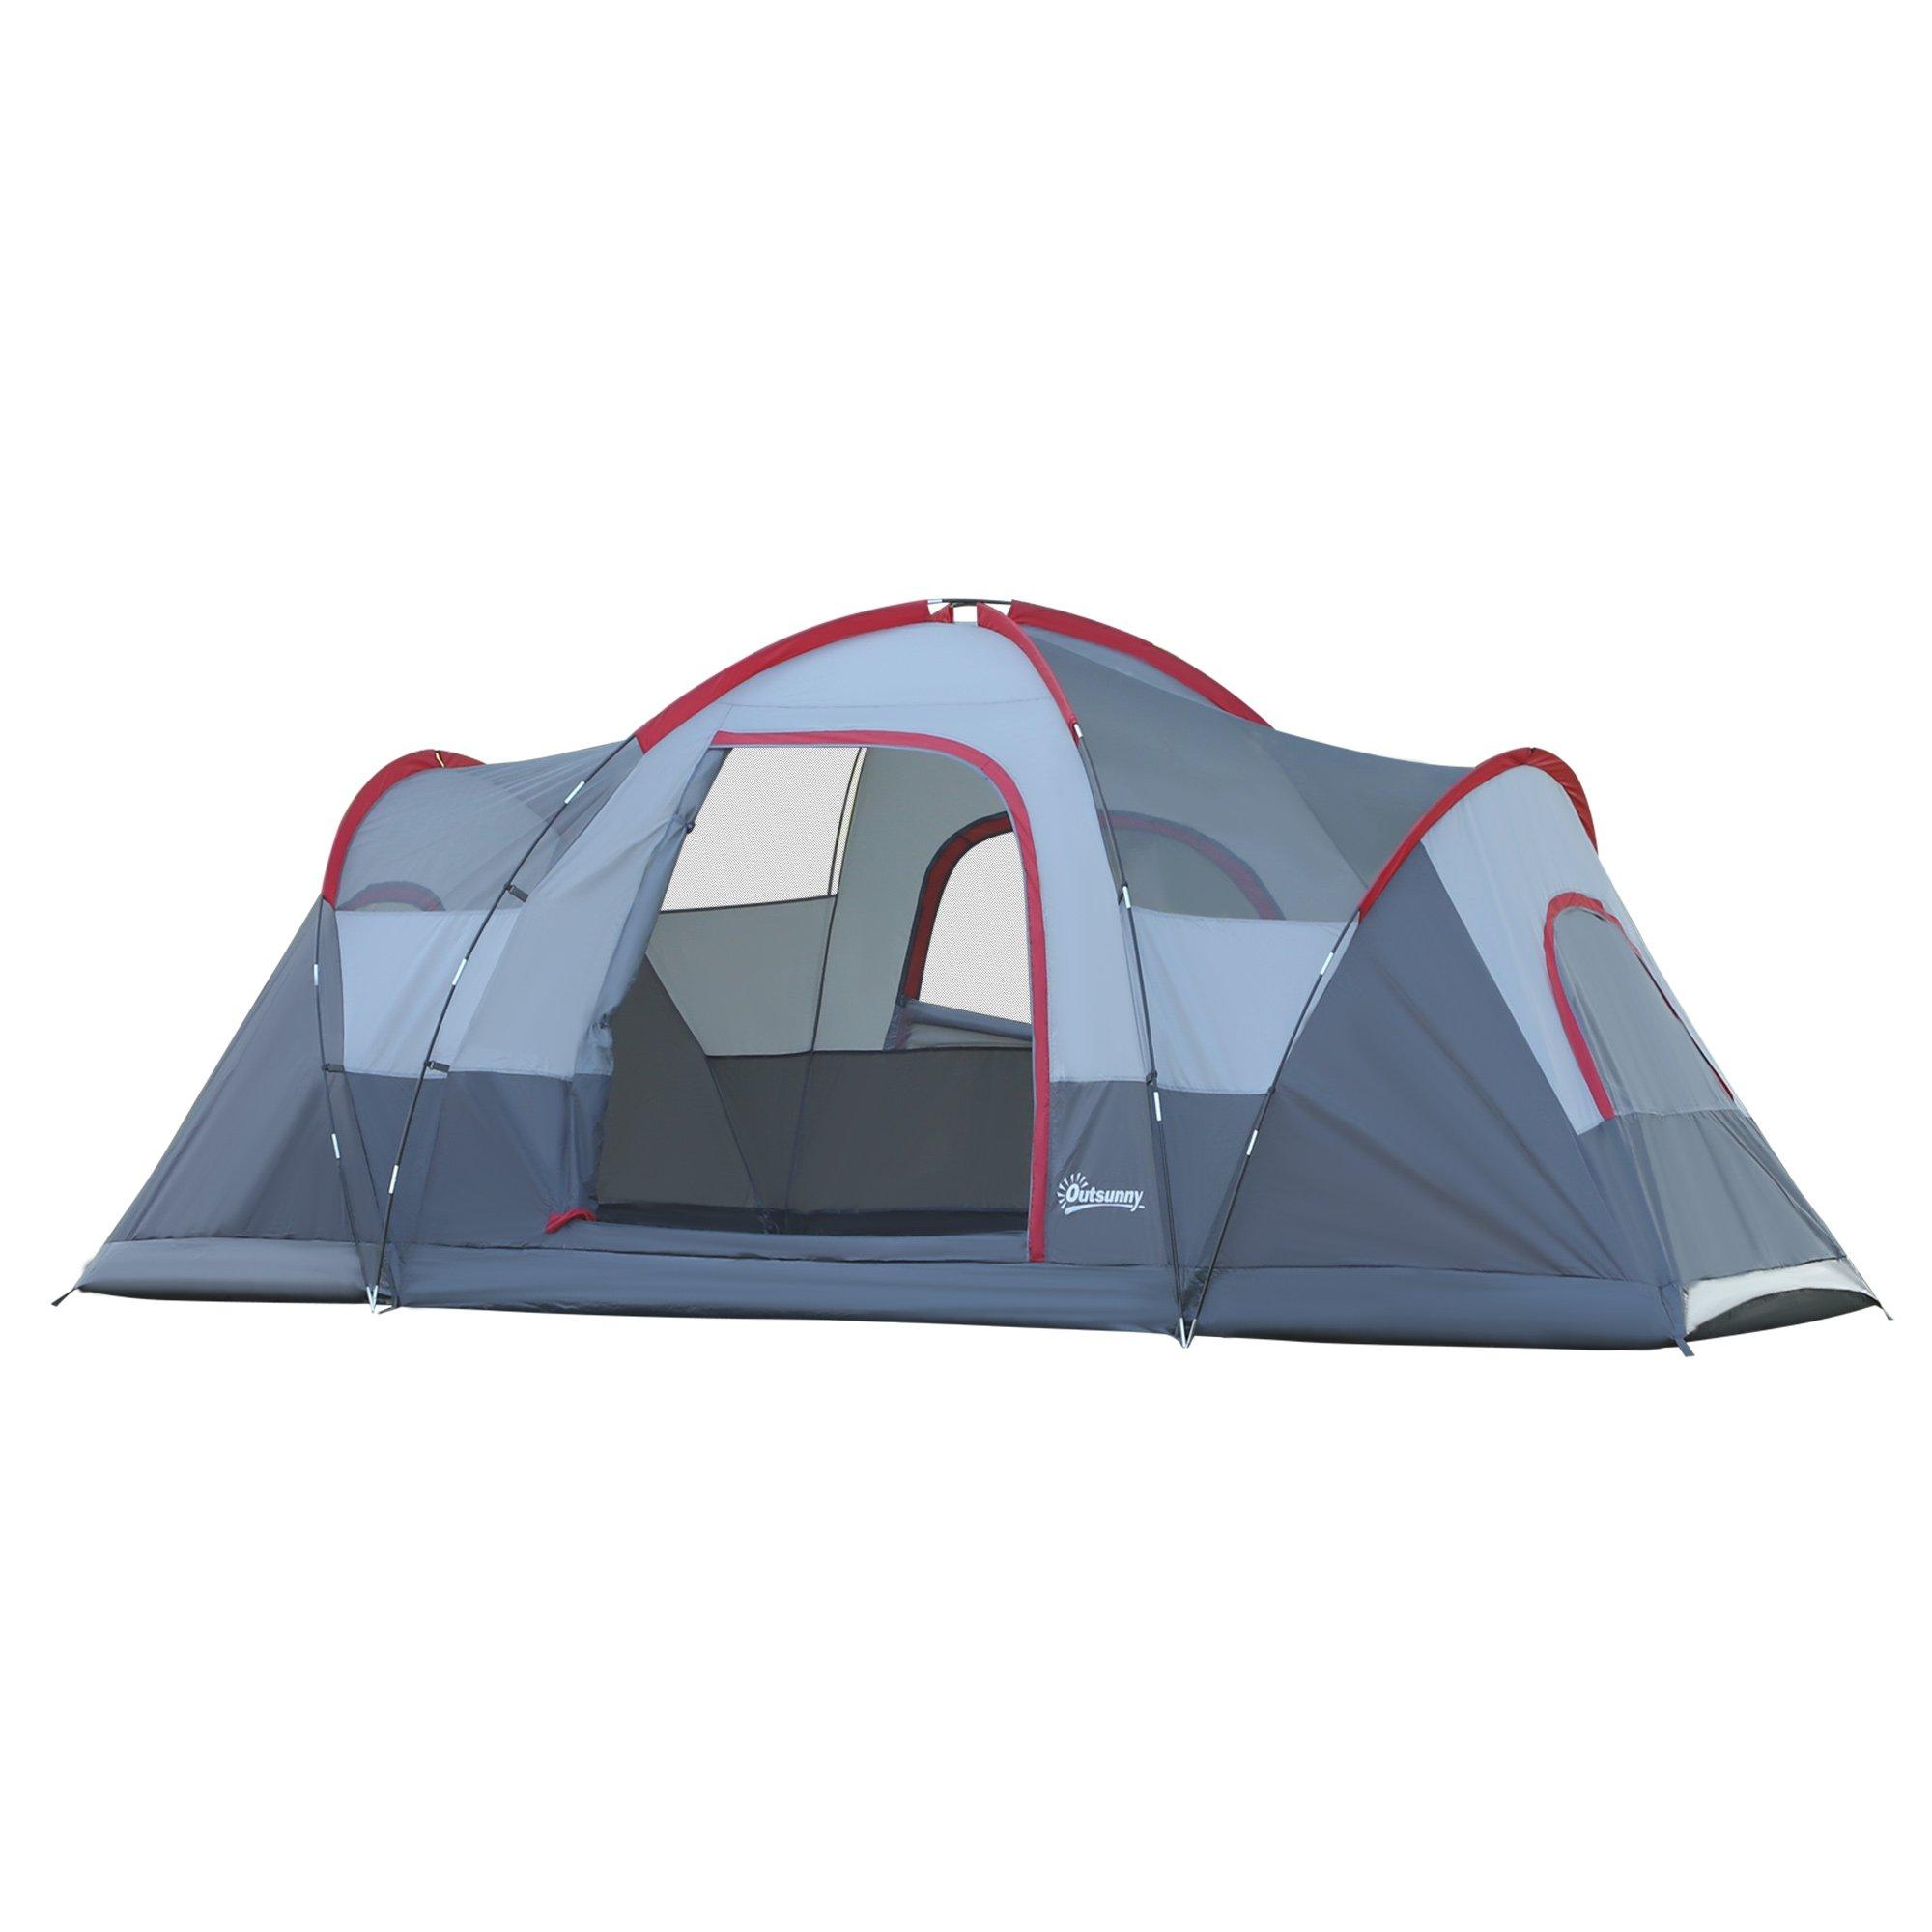 Outdoor  Camping Tent For 5-6 with Bag, Fibreglass & Steel Frame